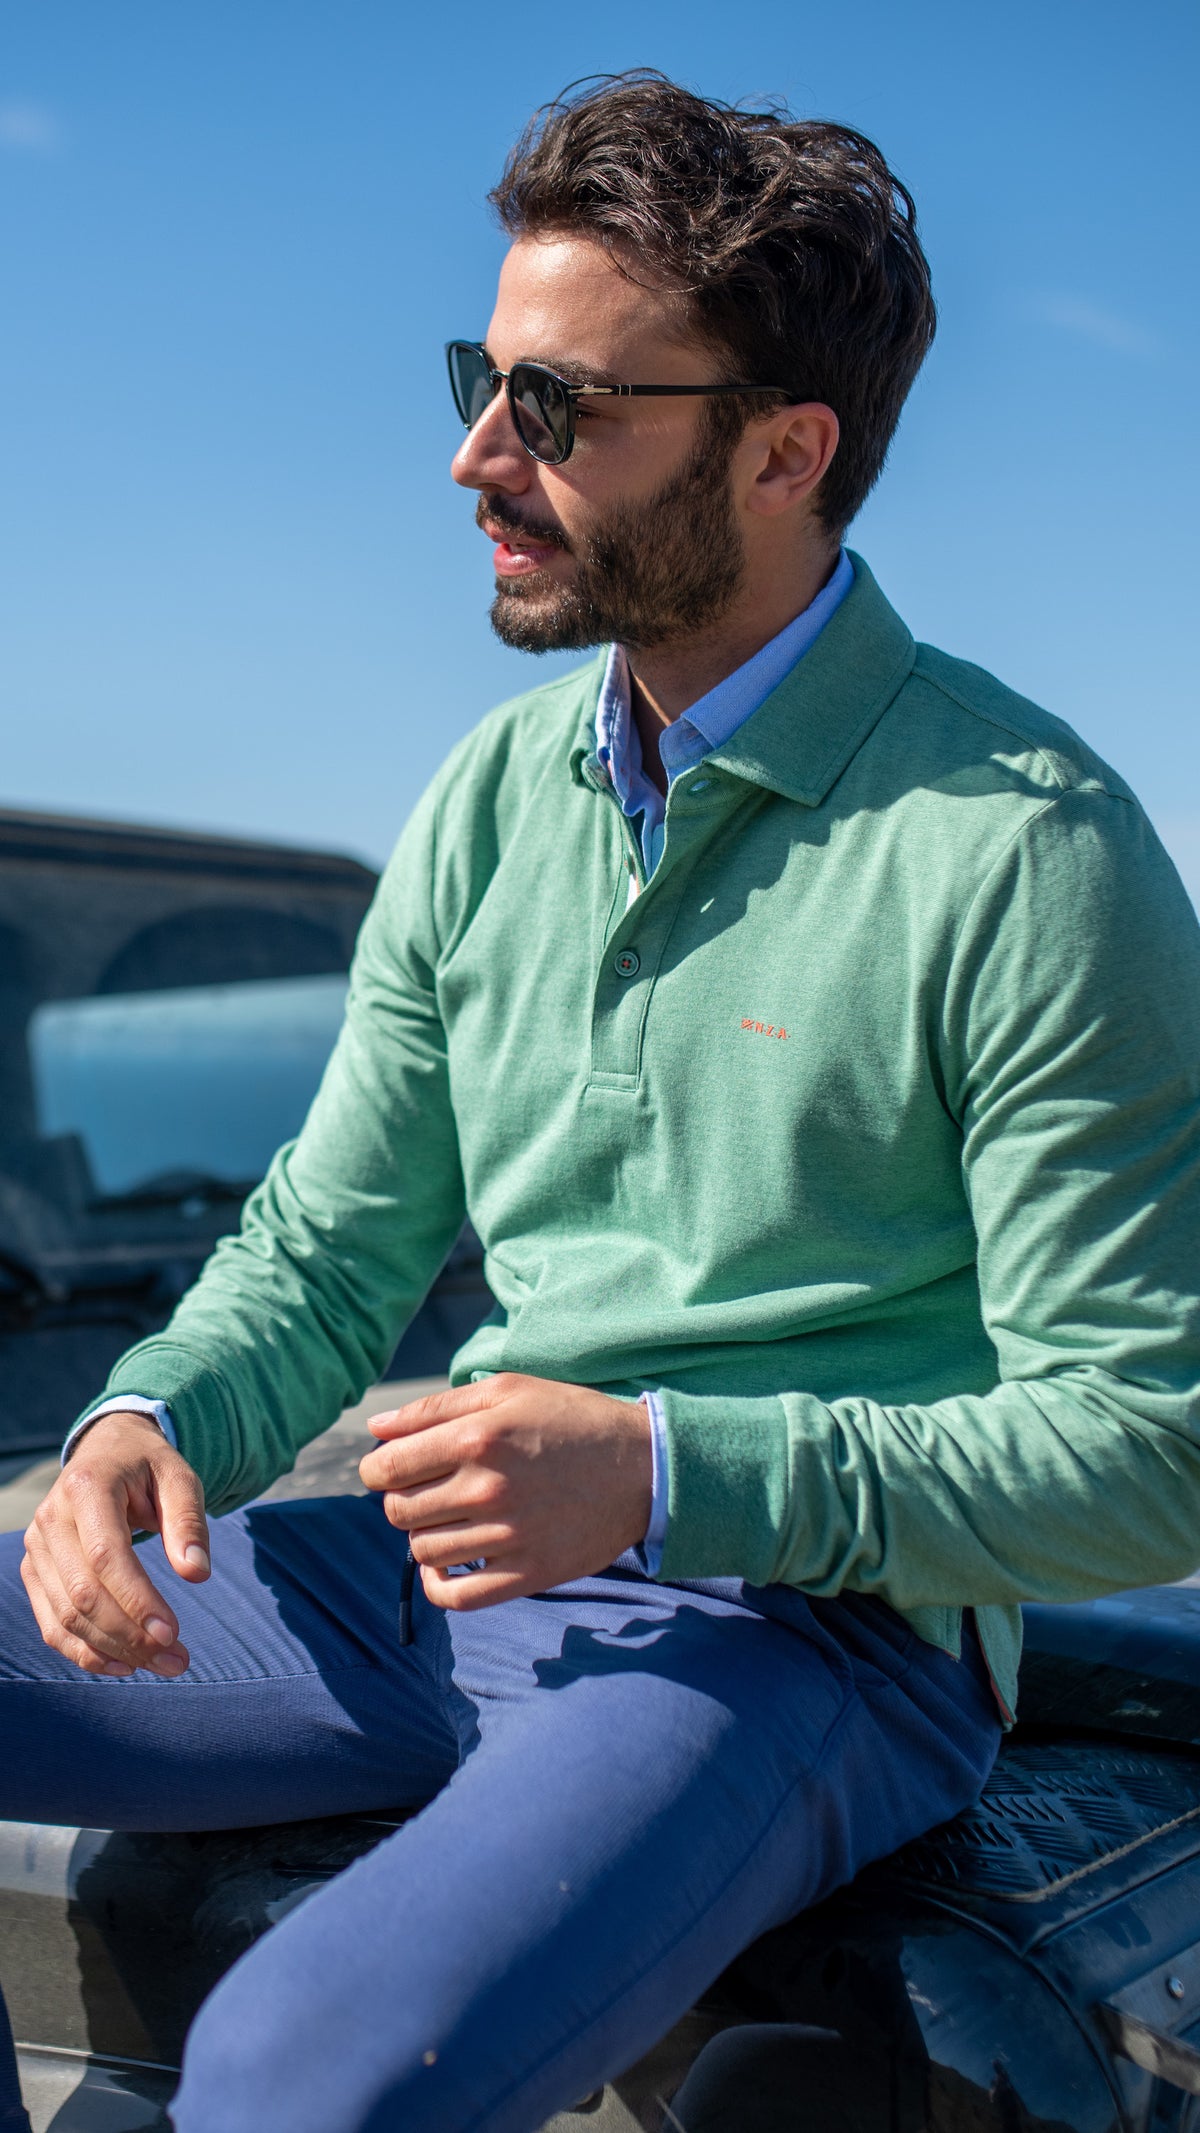 Longsleeve polo with stretch - Amazon Green